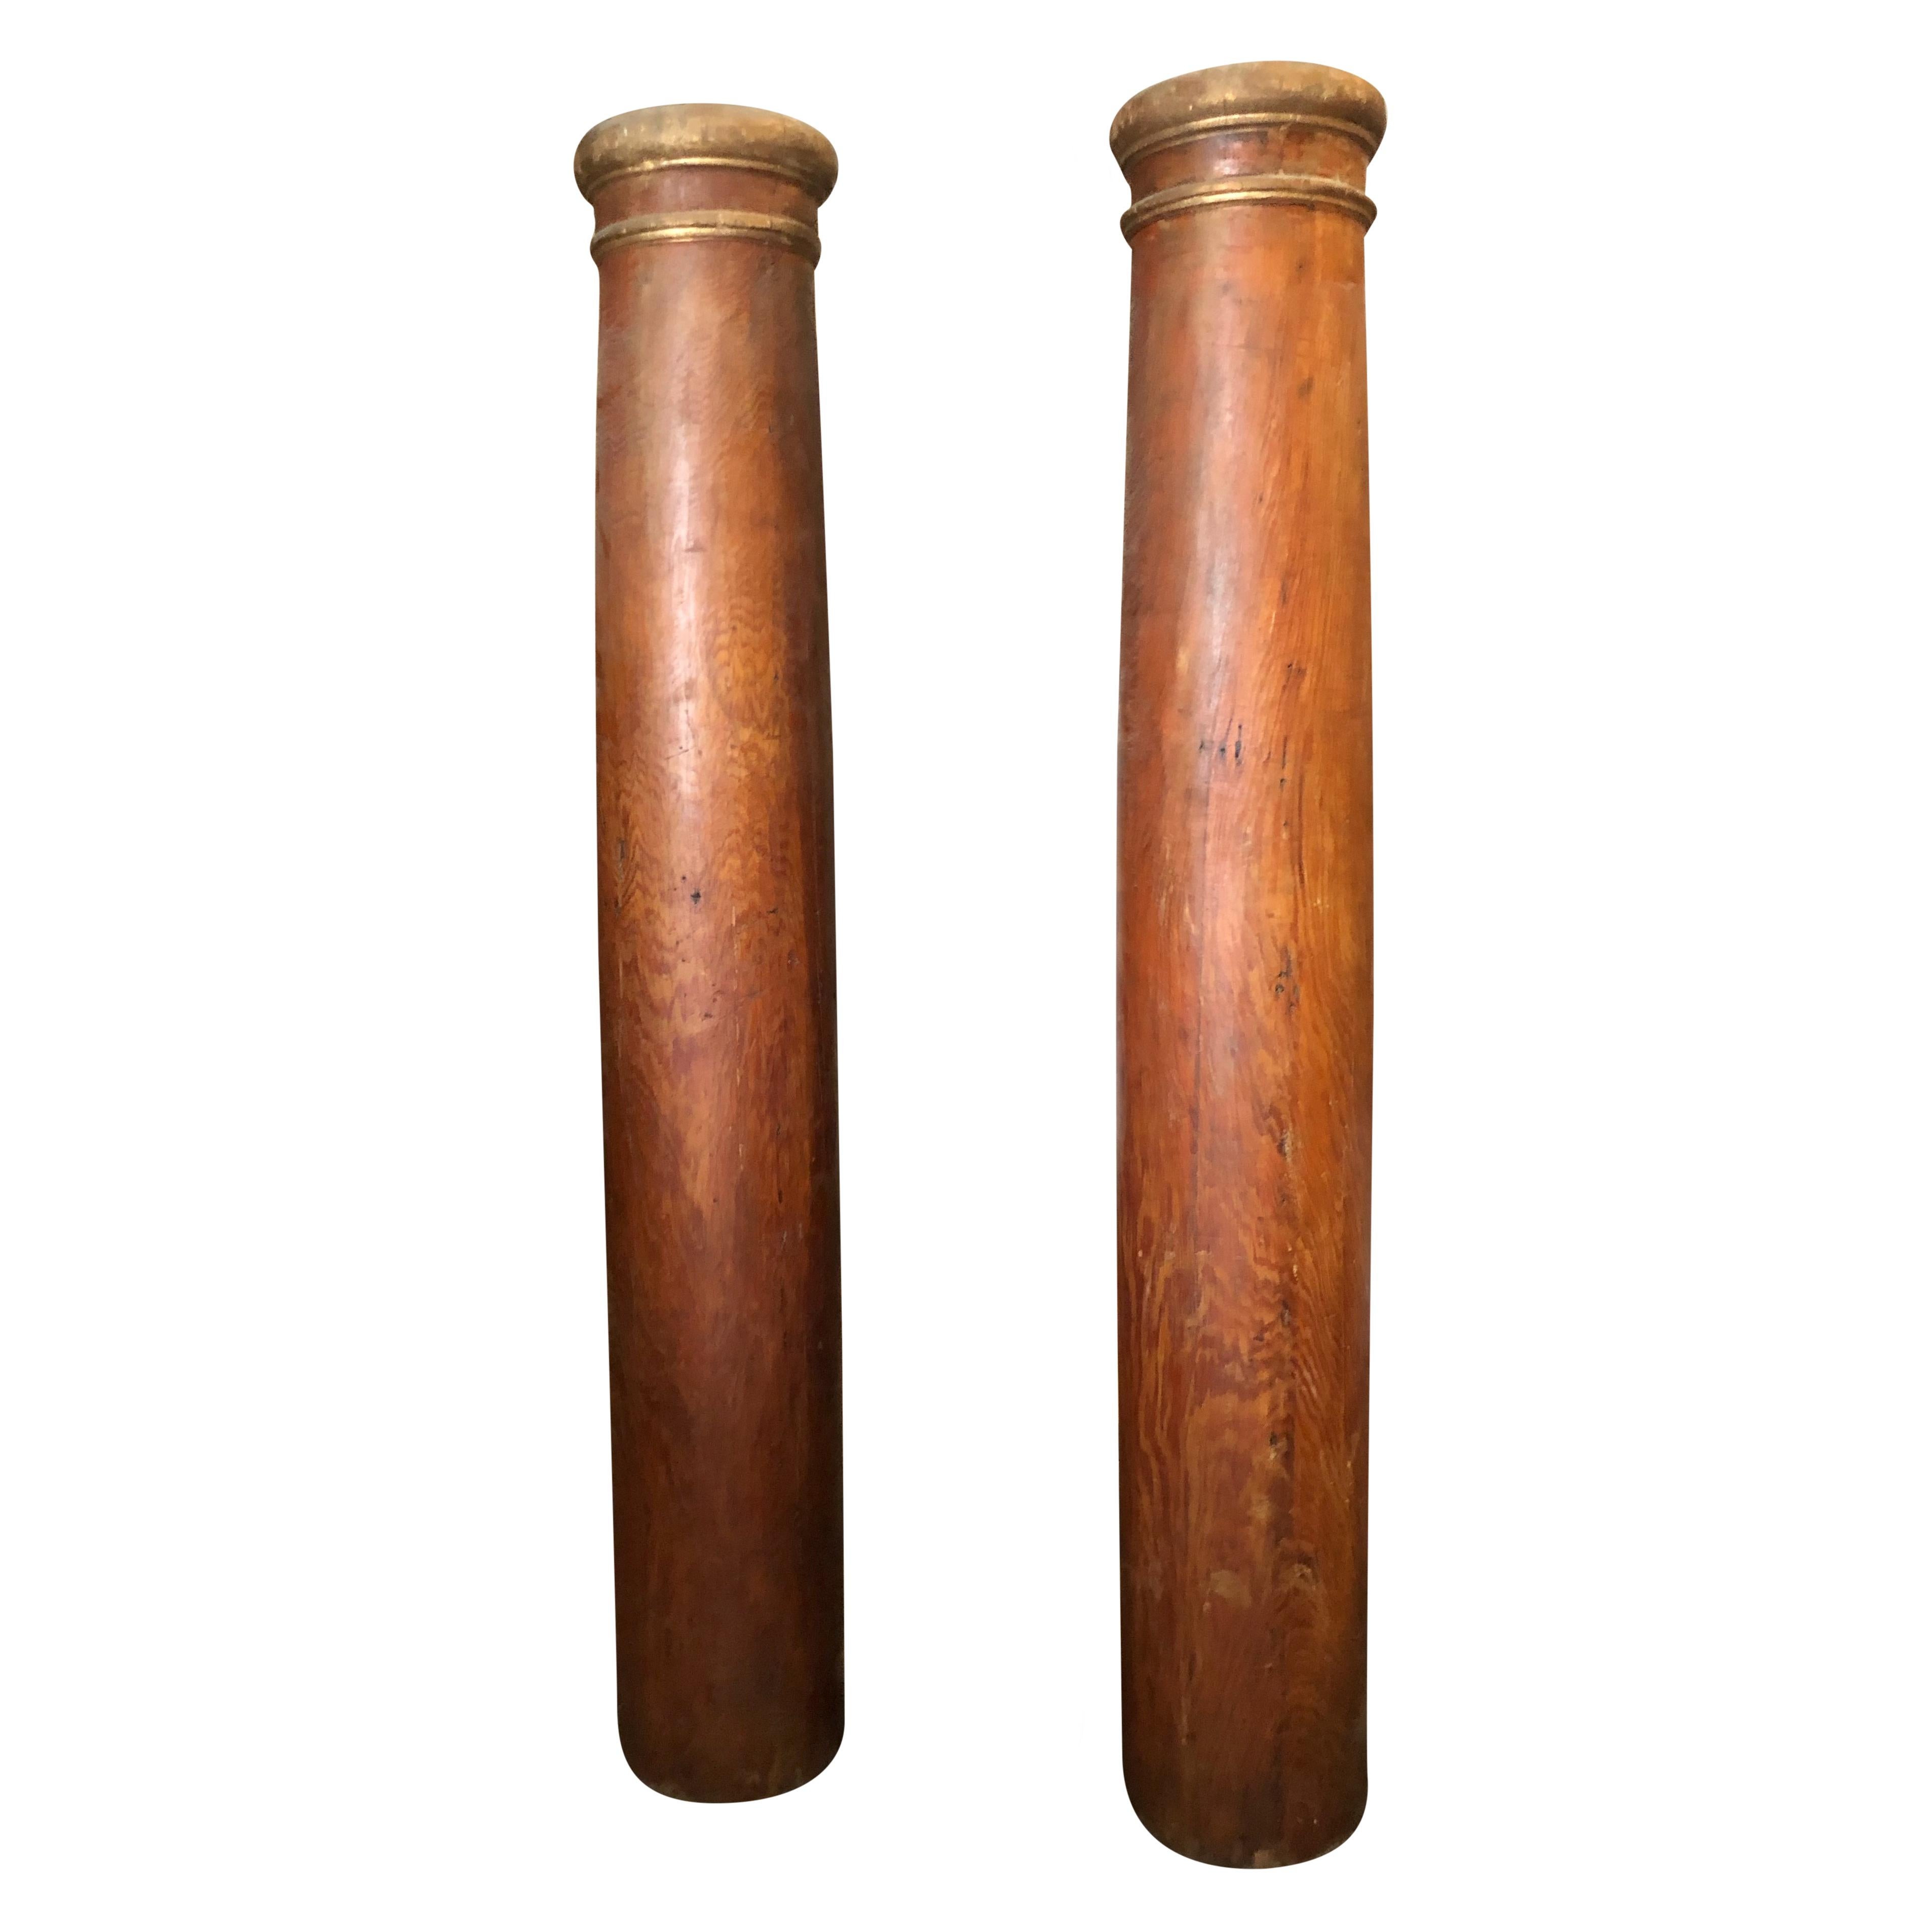 An antique Austrian Biedermeier pair of columns made of hand crafted polished Cherrywood, in good condition. The tall to décor pieces are enhanced by gilded circles around the top. The Biedermeier period refers to a time period around 1815 - 1848 in